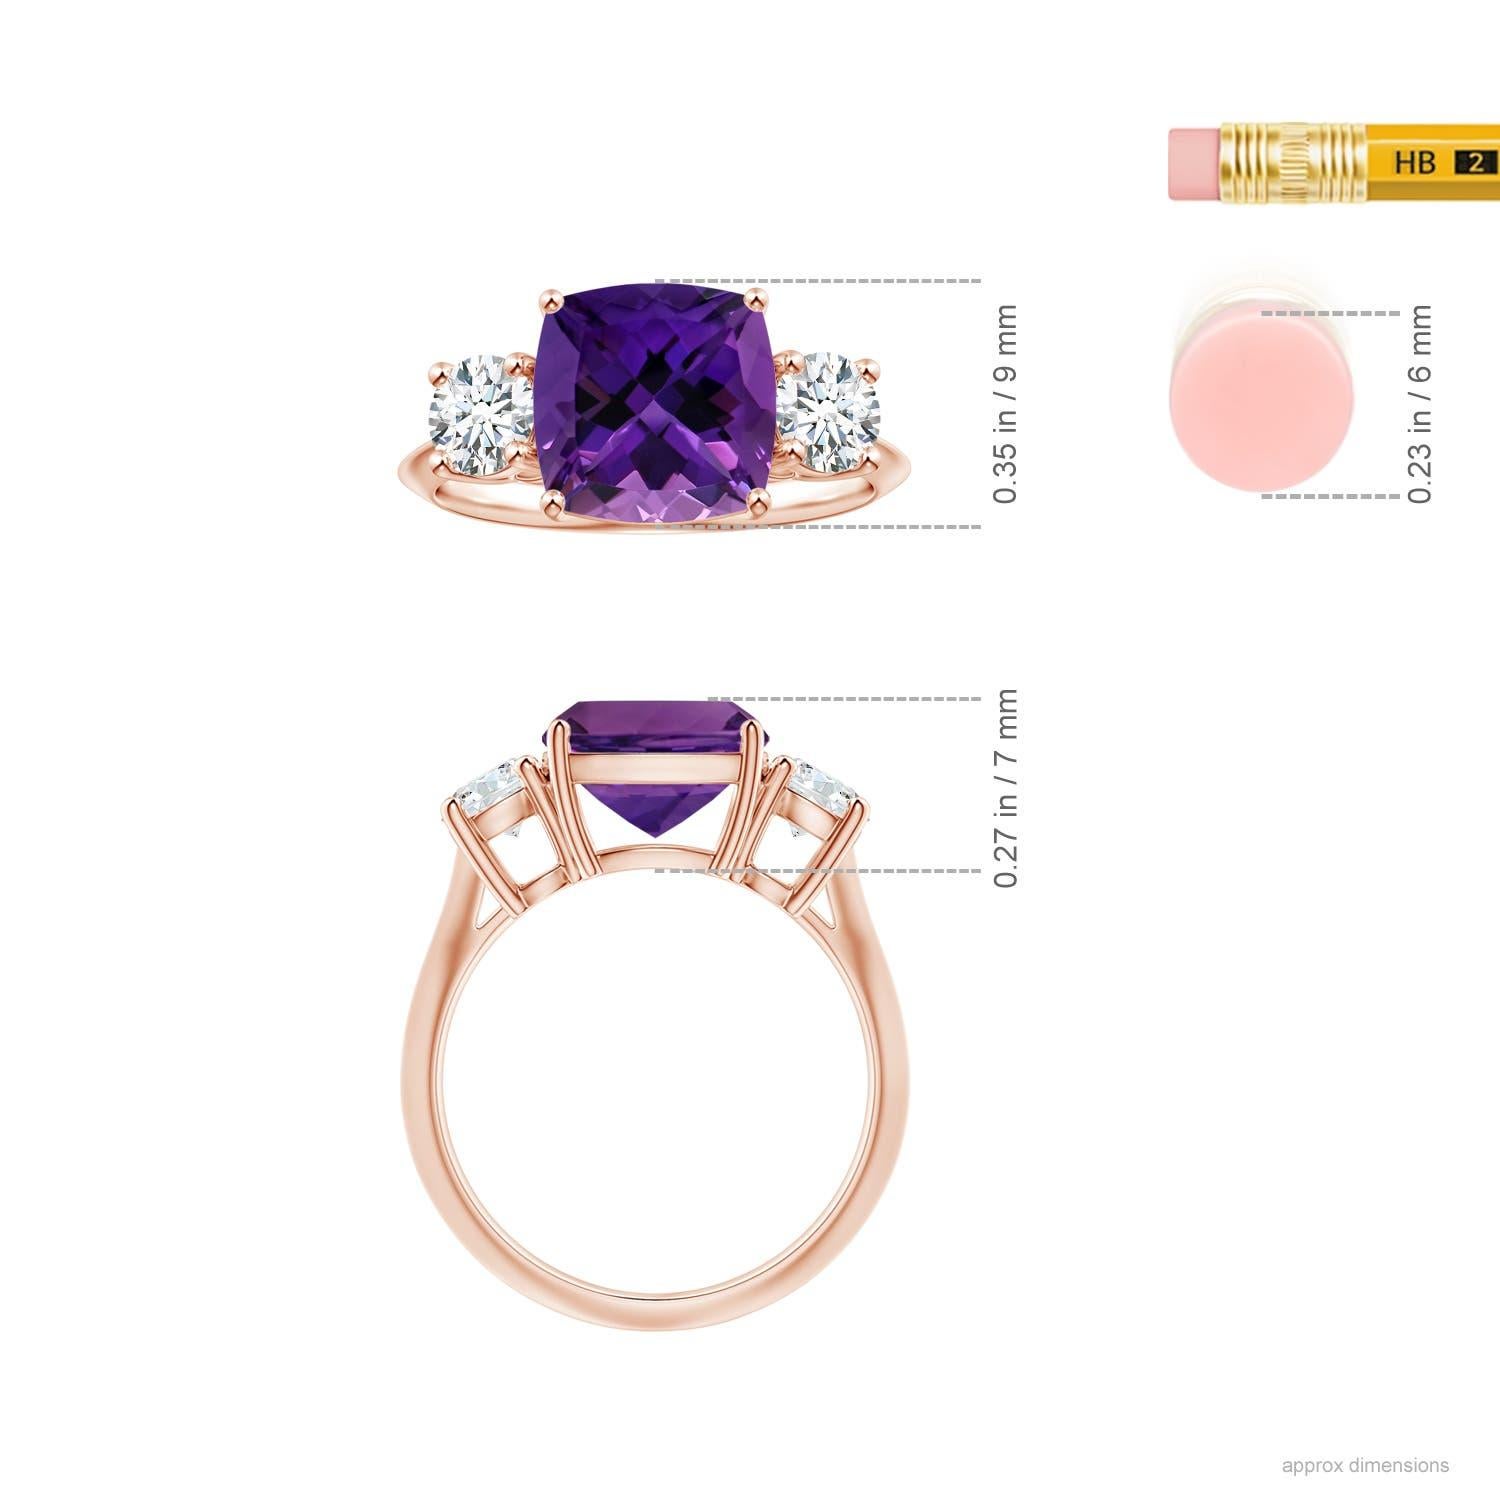 For Sale:  Angara 3-Stone Gia Certified Cushion Amethyst Ring in Rose Gold with Diamonds 6